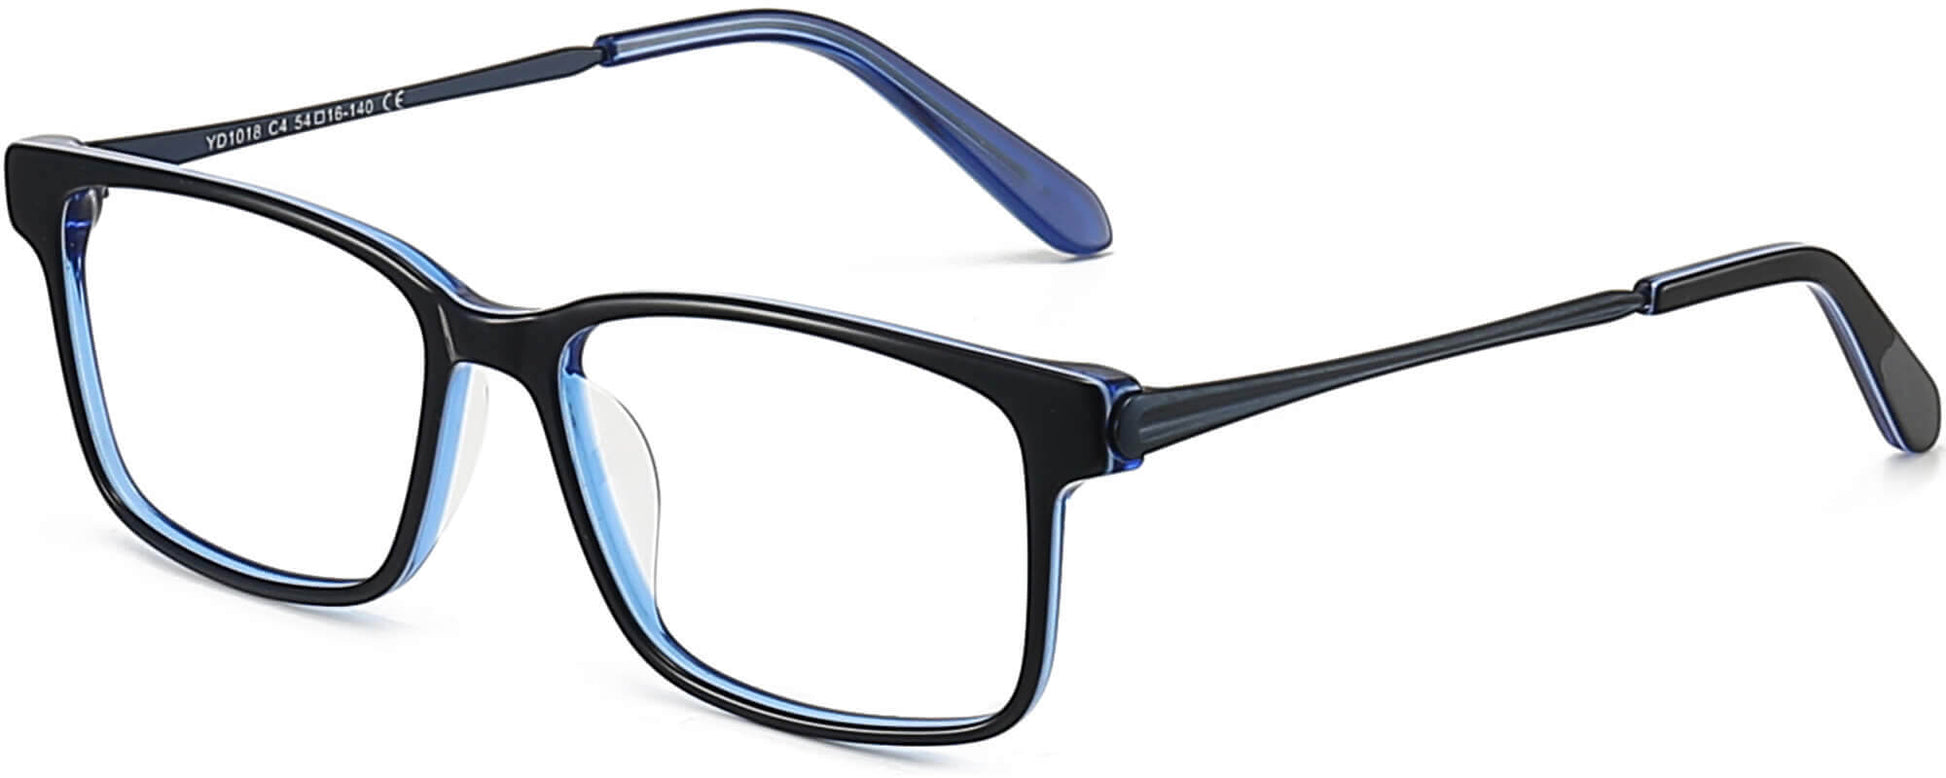 Finnegan Rectangle Blue Eyeglasses from ANRRI, angle view